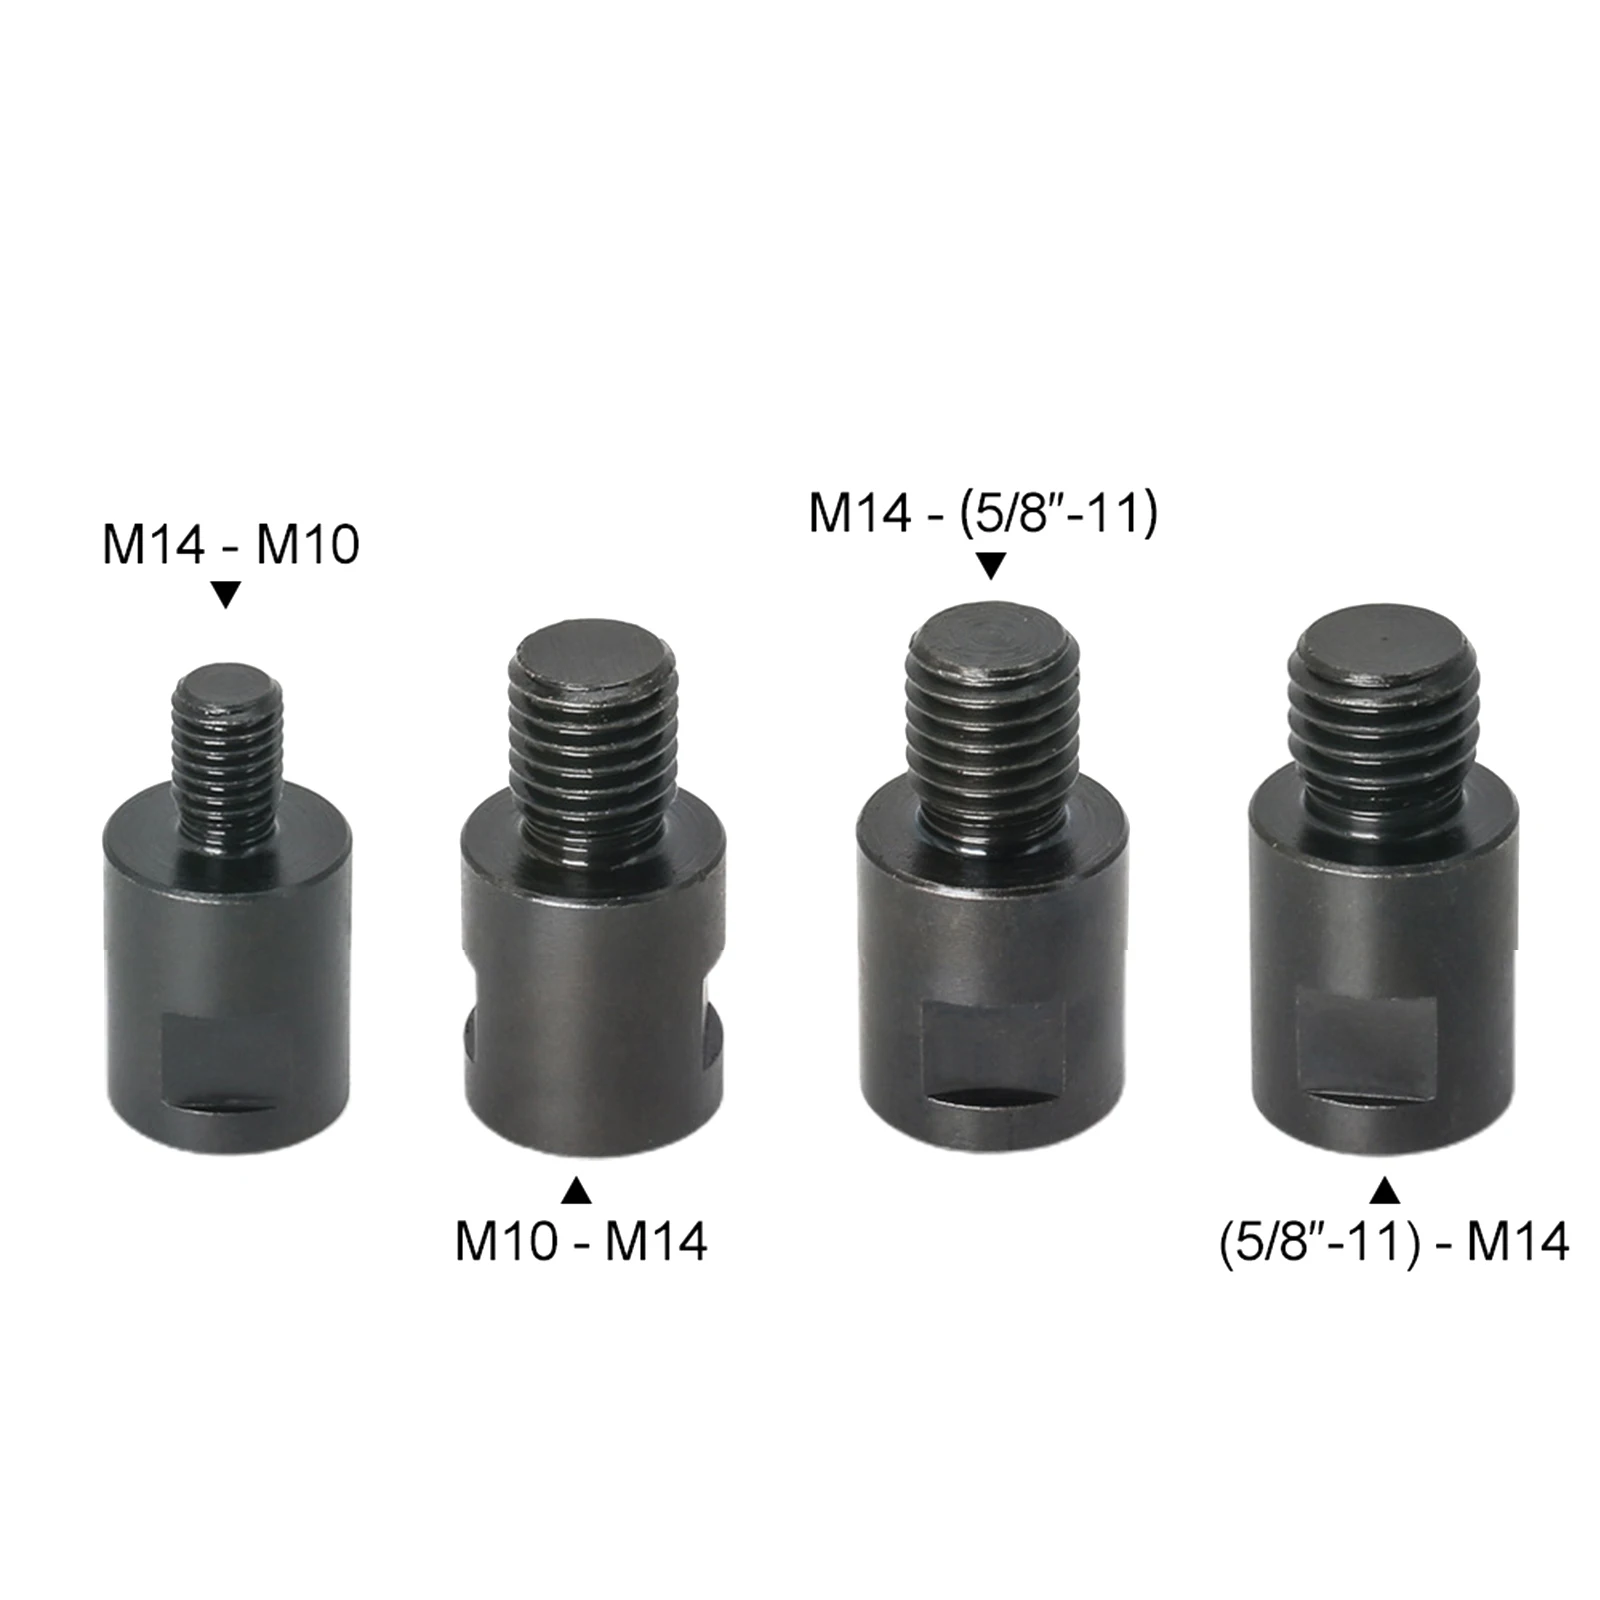 

Angle Grinder Adapter Converter M10 M14 5/8-11 Converter Adapte Arbor Interface Connector Screw Connecting Rod Nuts